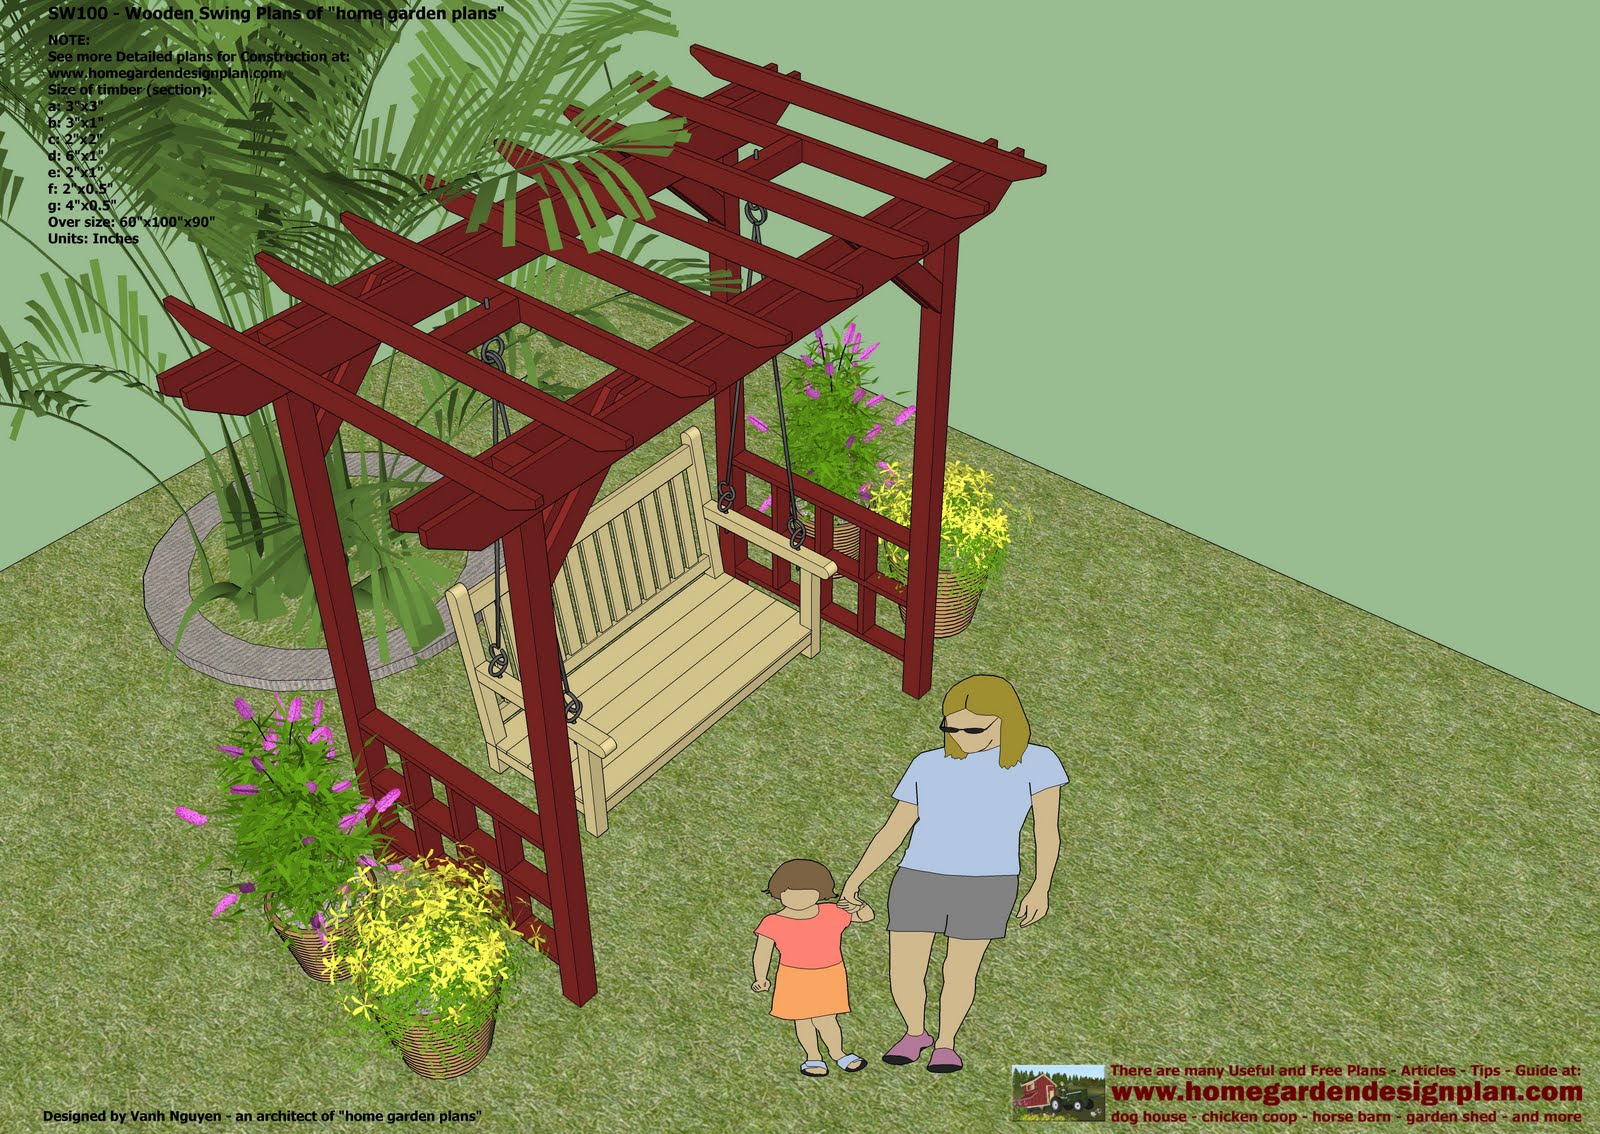  Arbor Swing Plans - Swing Woodworking Plans - Outdoor Furniture Plans